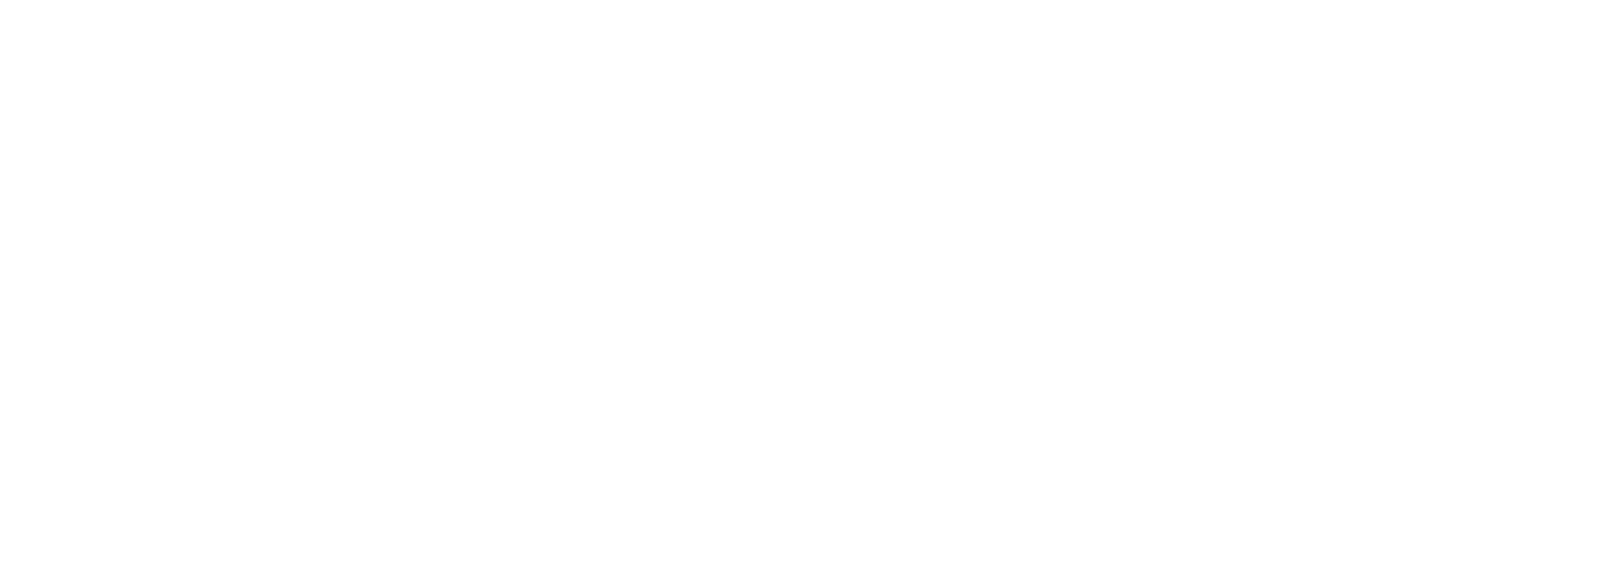 NBC Sports and Classroom Champions logos, side by side in white